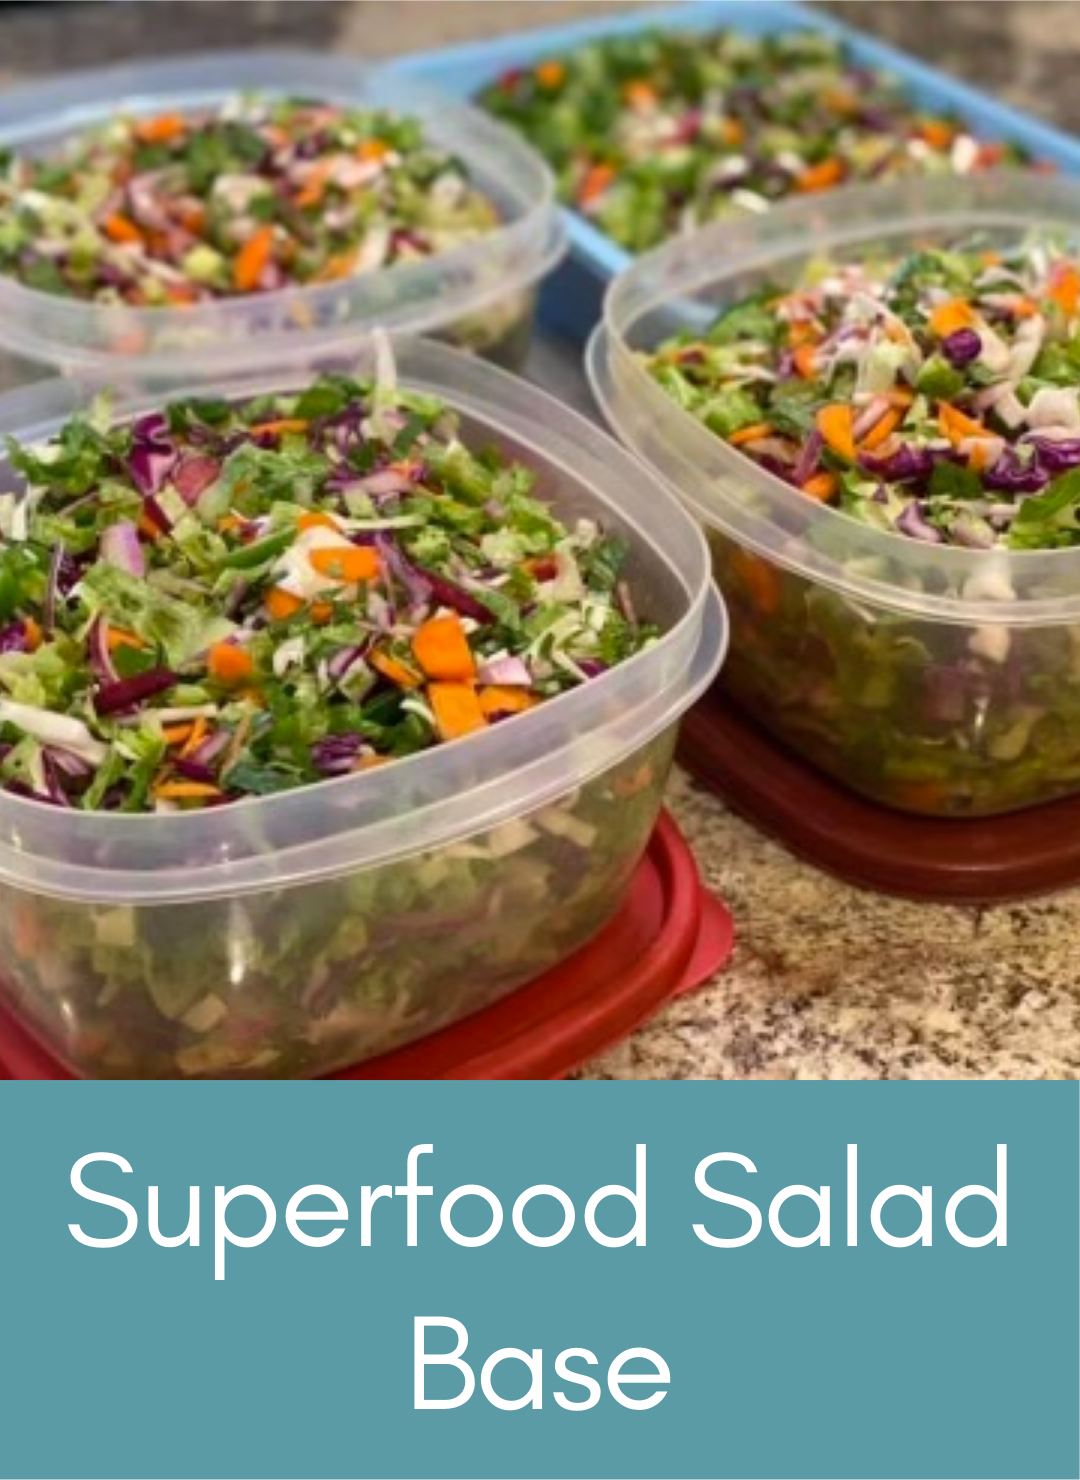 Superfood salad base Picture with link to recipe